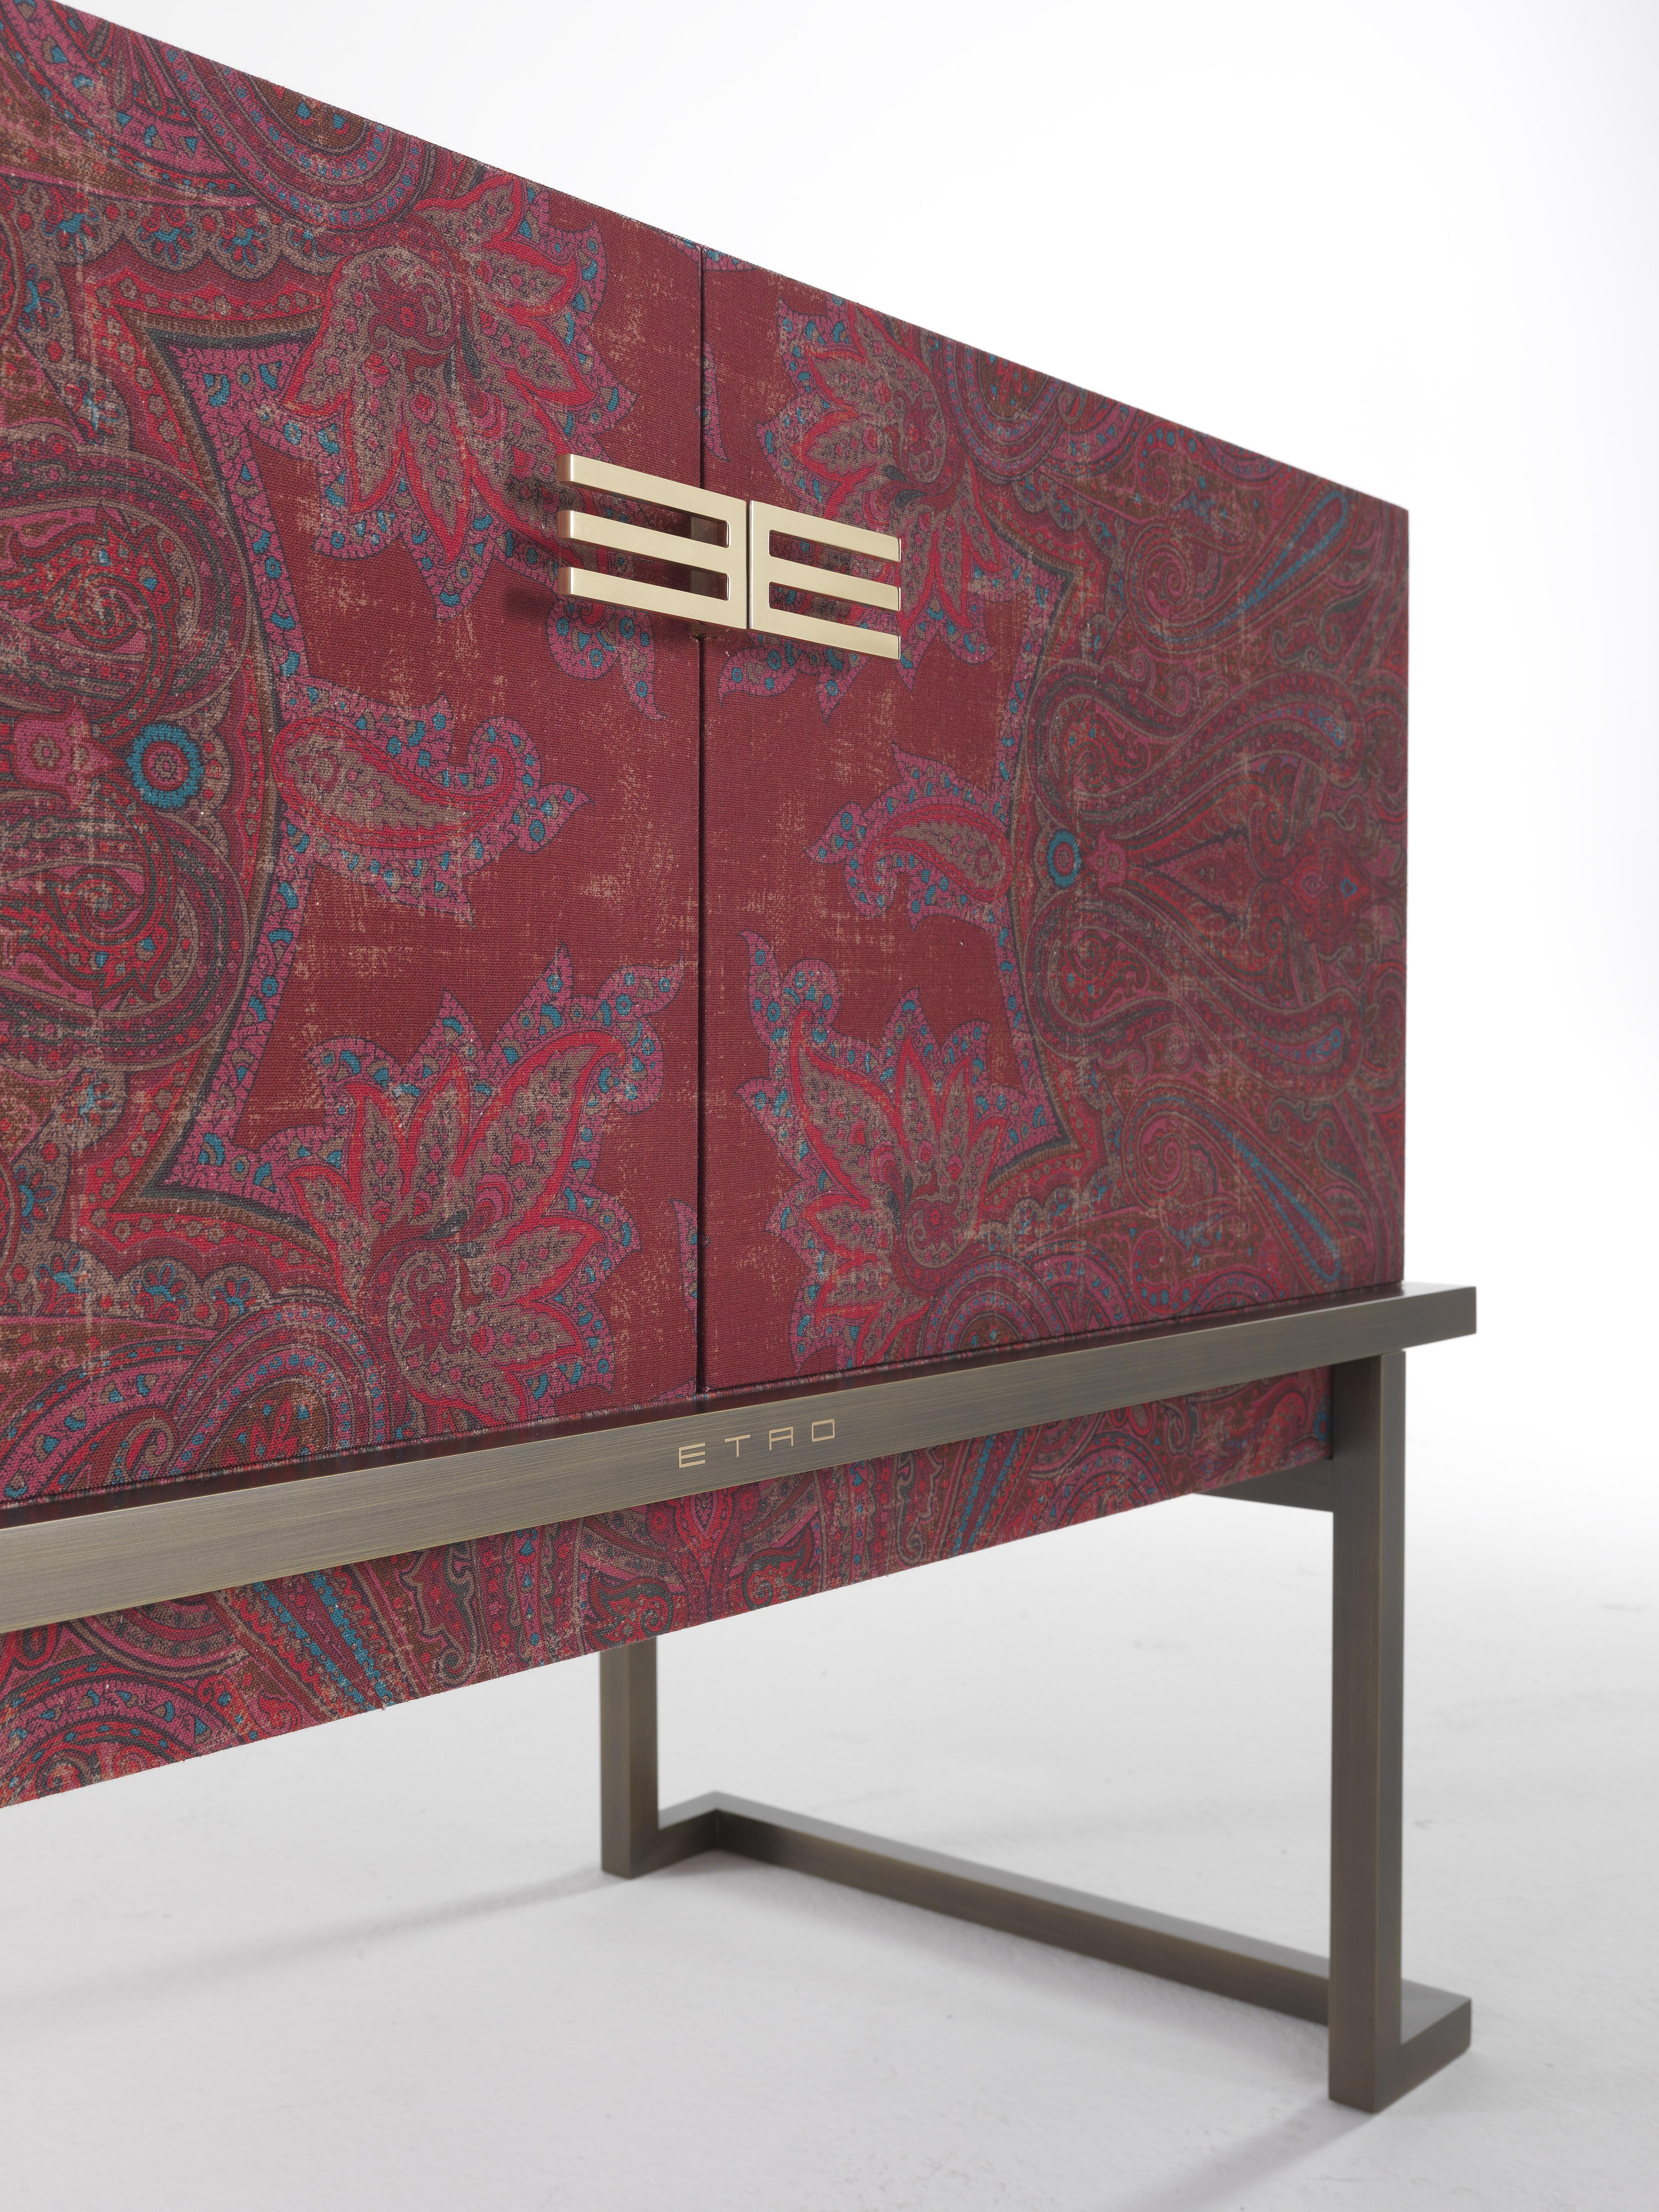 Italian 21st Century Kolkata Sideboard in Wood and Fabric by Etro Home Interiors